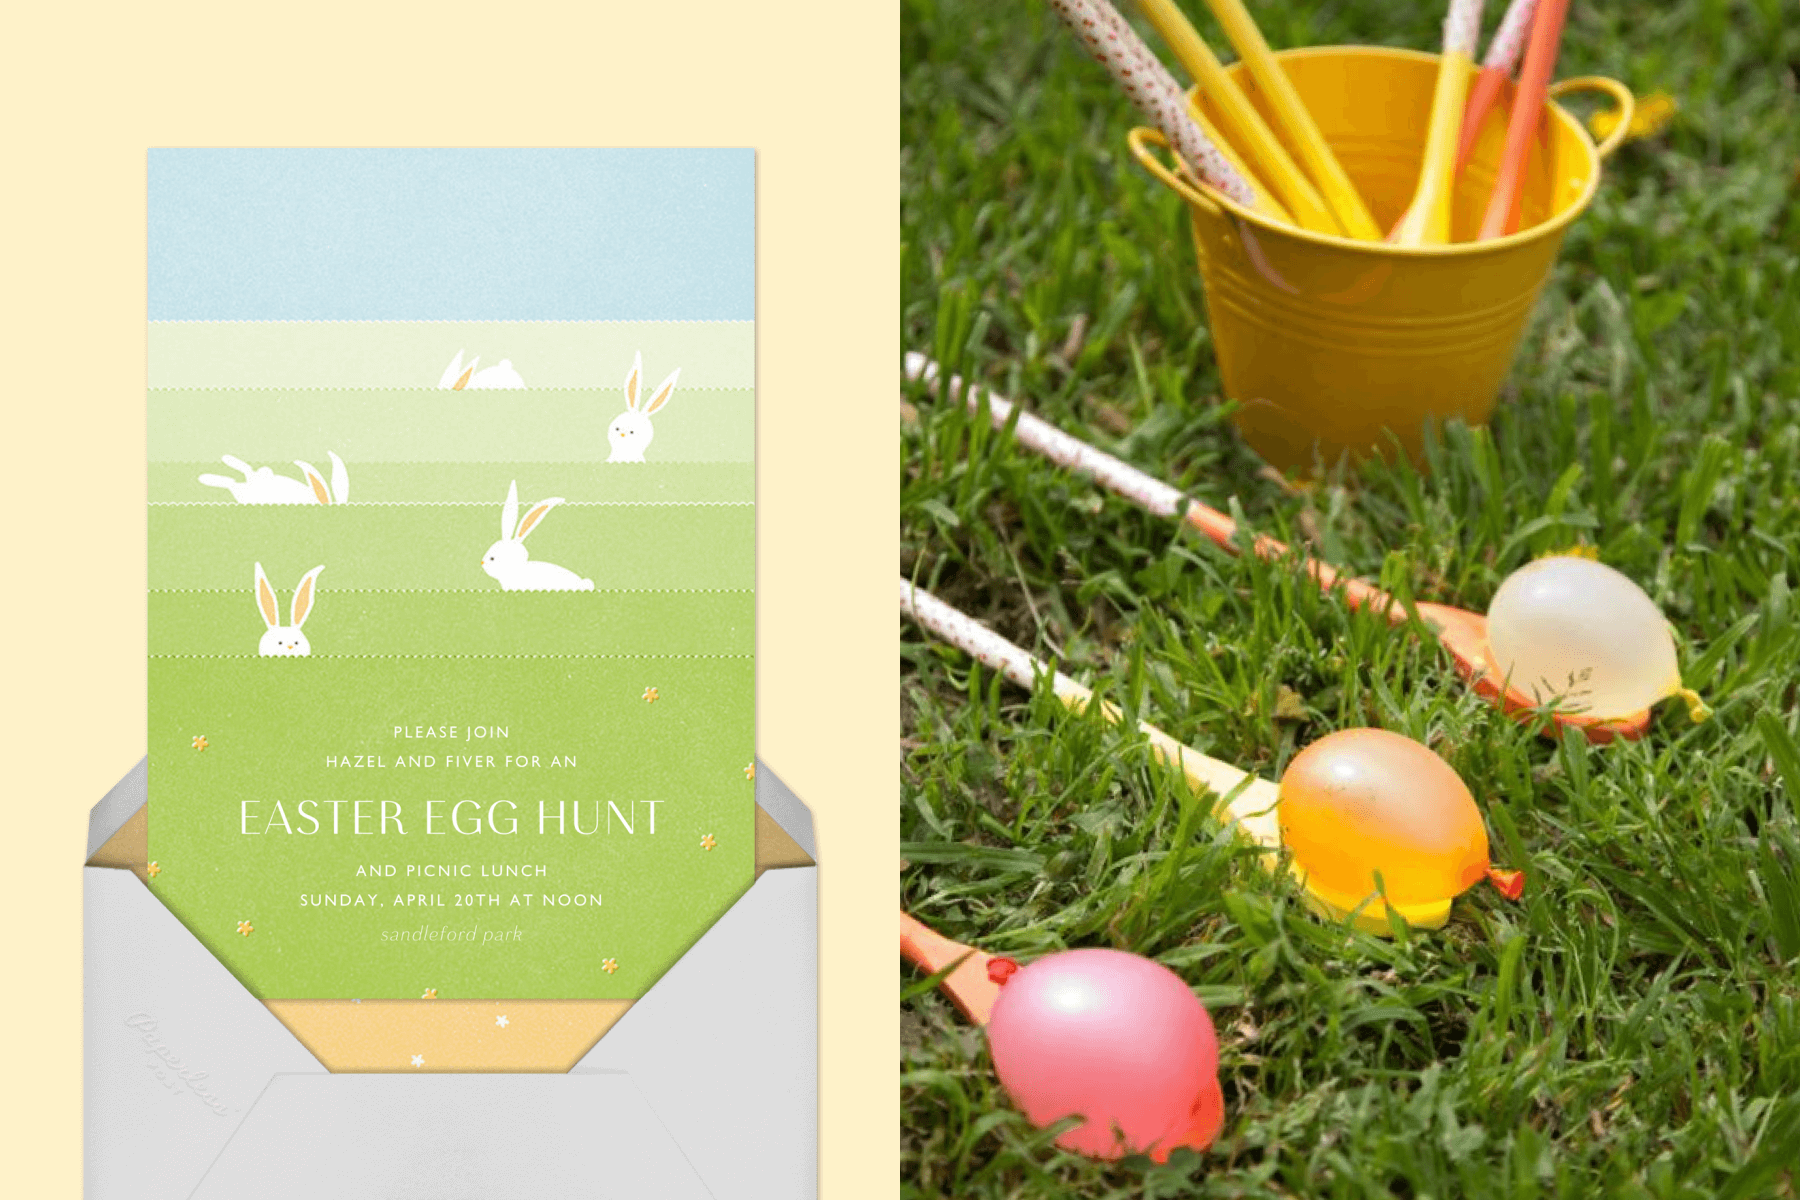 Left: An Easter invitation with illustrated white rabbits hopping in grass. Right: Small water balloons are balanced on long spoons, ready for a race.